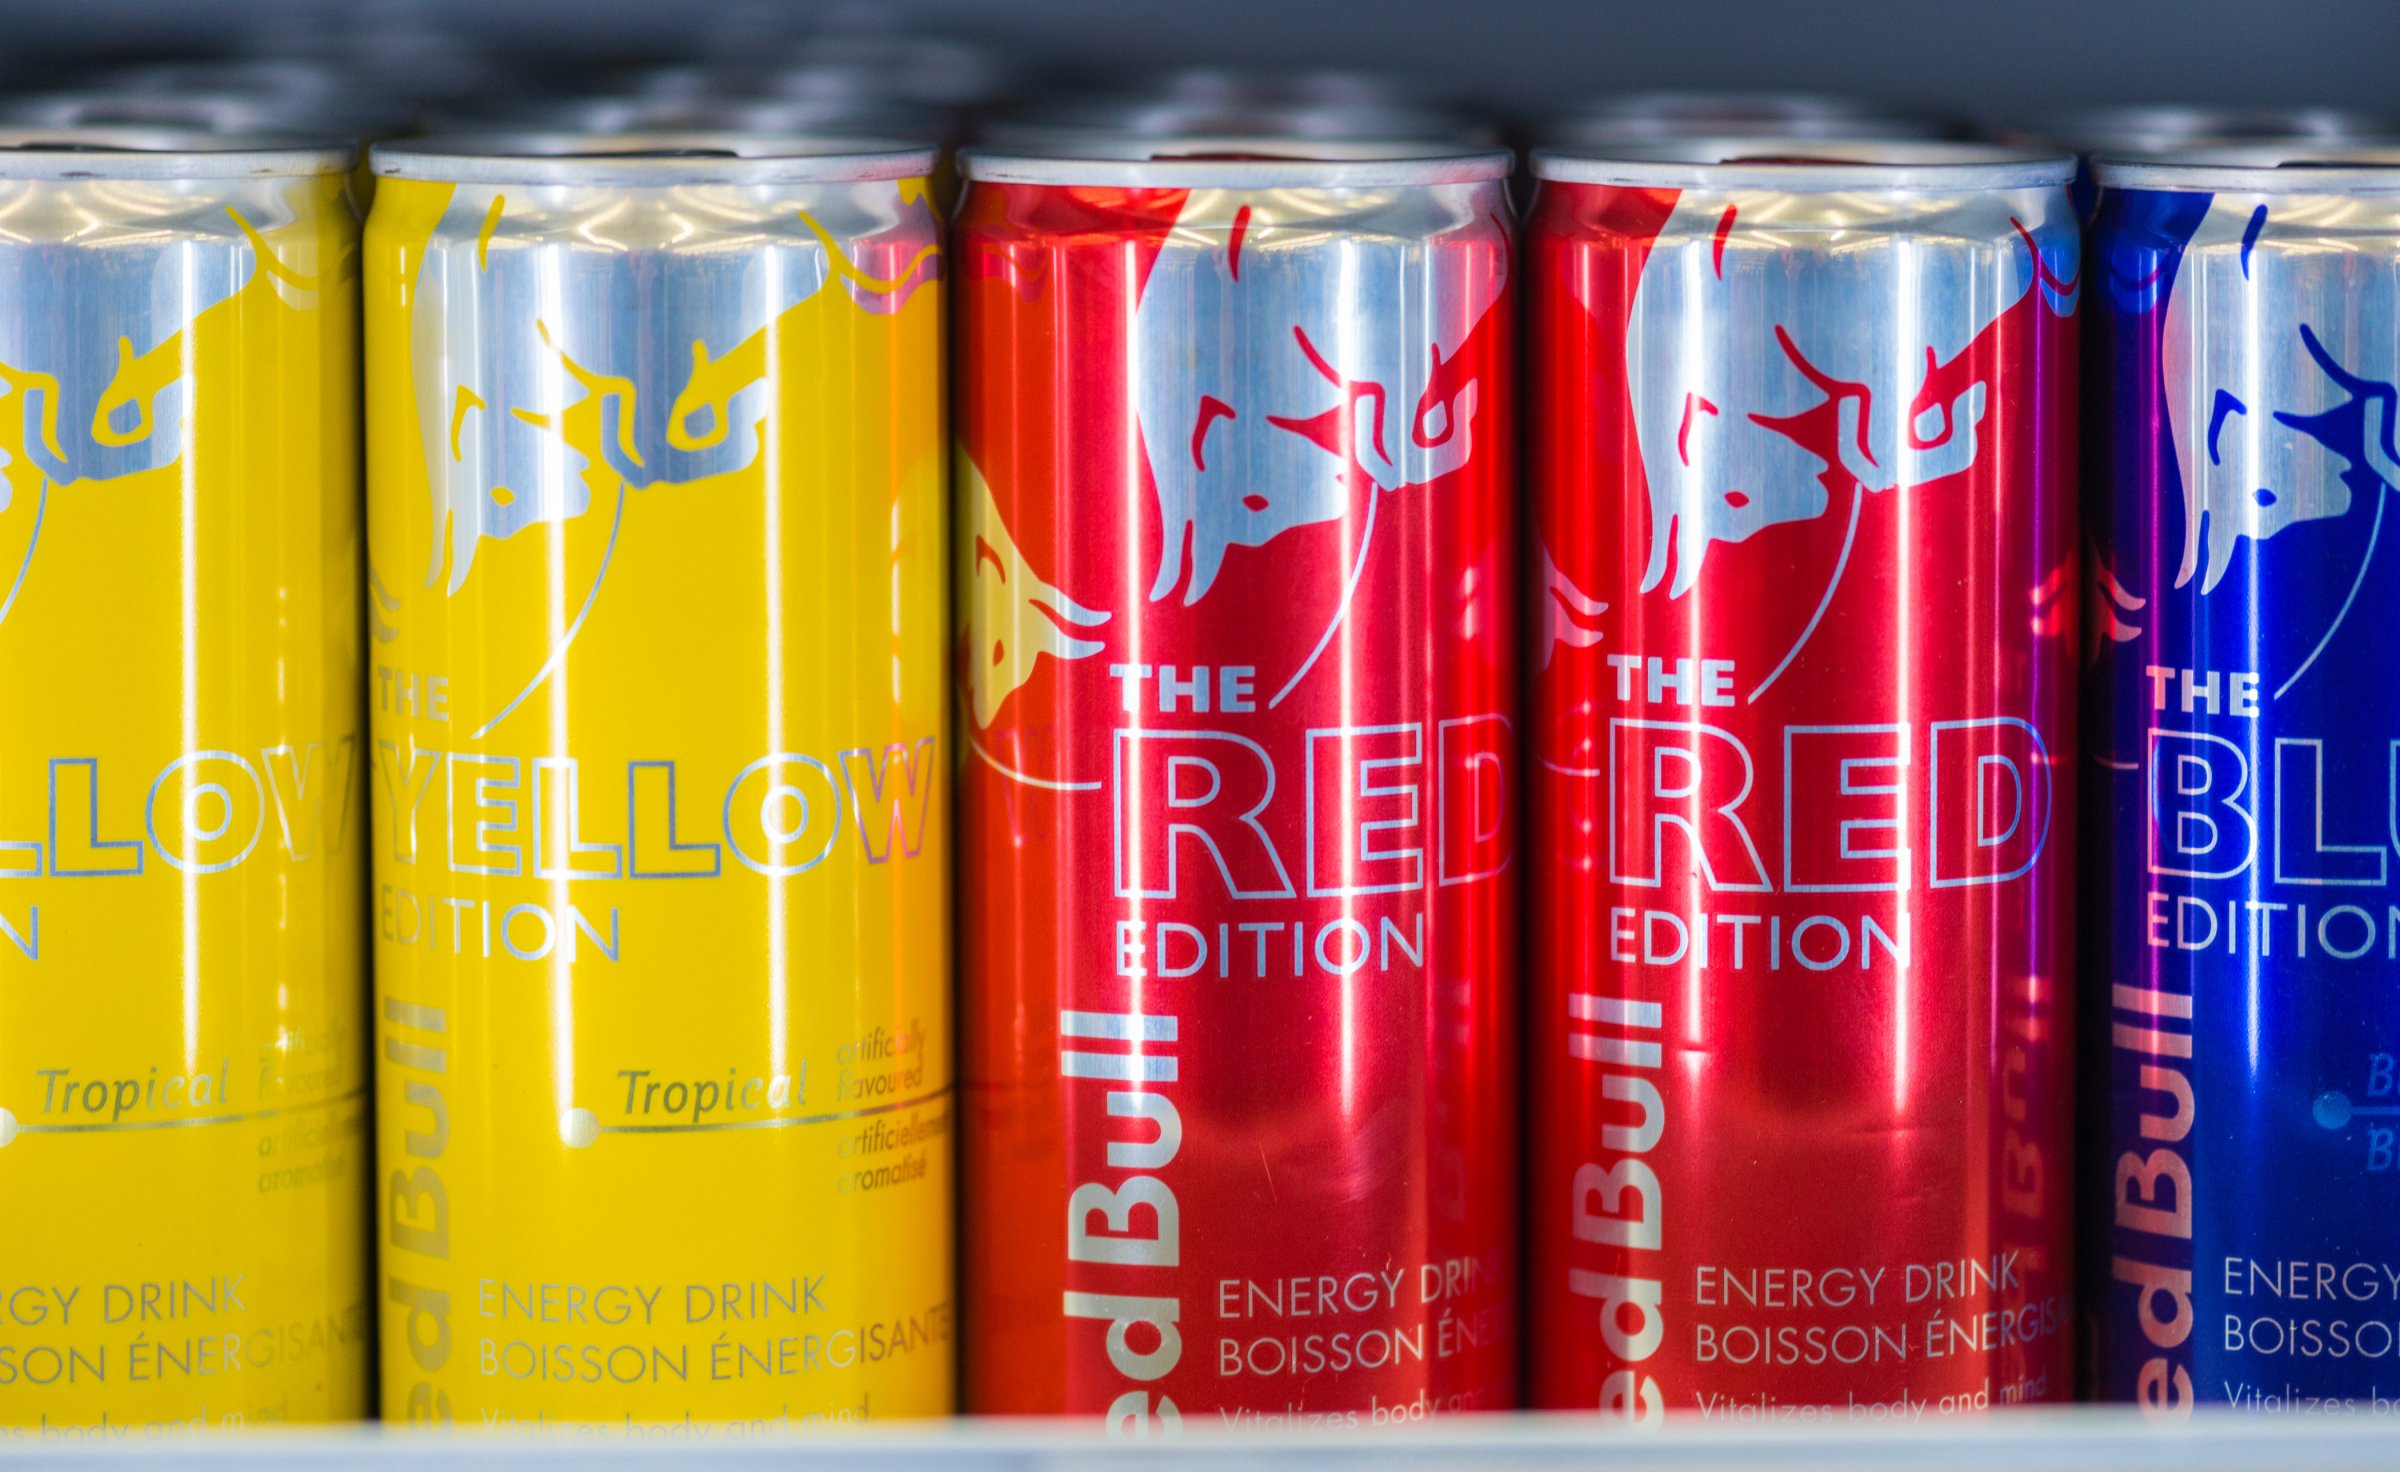 Cans of Red Bull Energy Drink: Red Bull is an energy drink sold by an Austrian company it is highest-selling energy drink in the world.